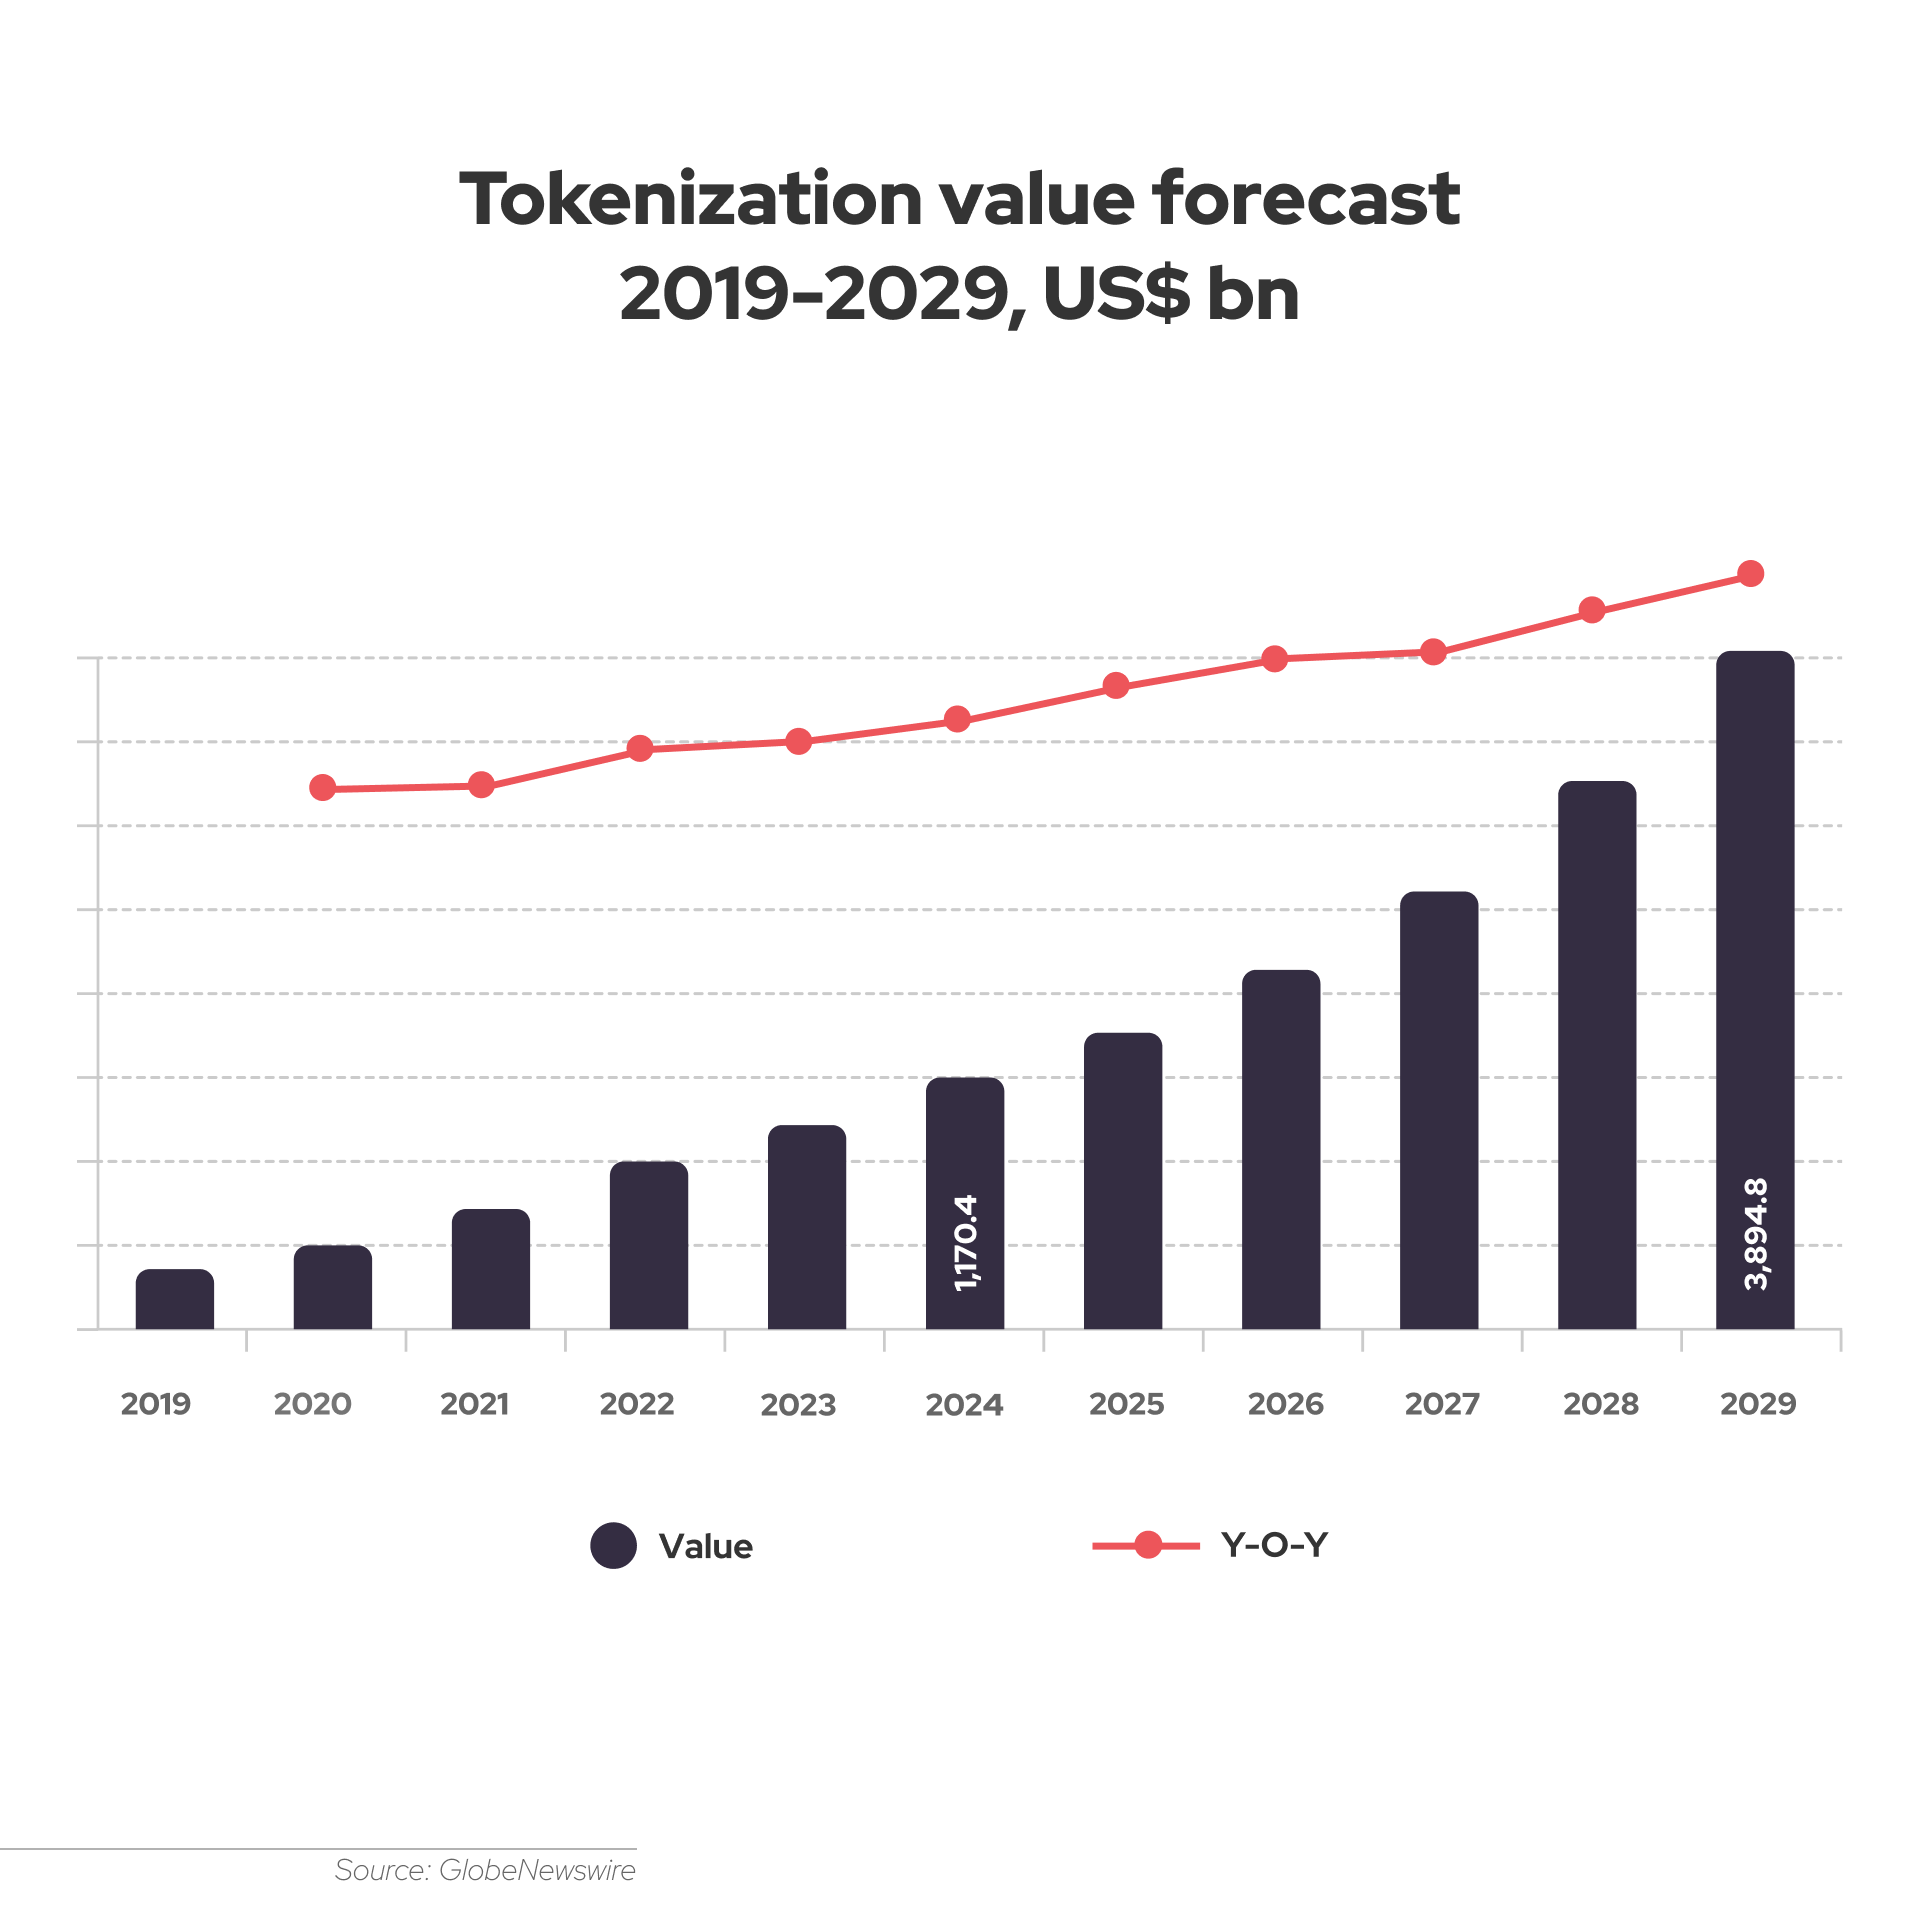 Blockchain technology has the potential to greatly impact the real estate industry, with the tokenization value expected to reach $1,170bn by 2024 and triple by 2029.